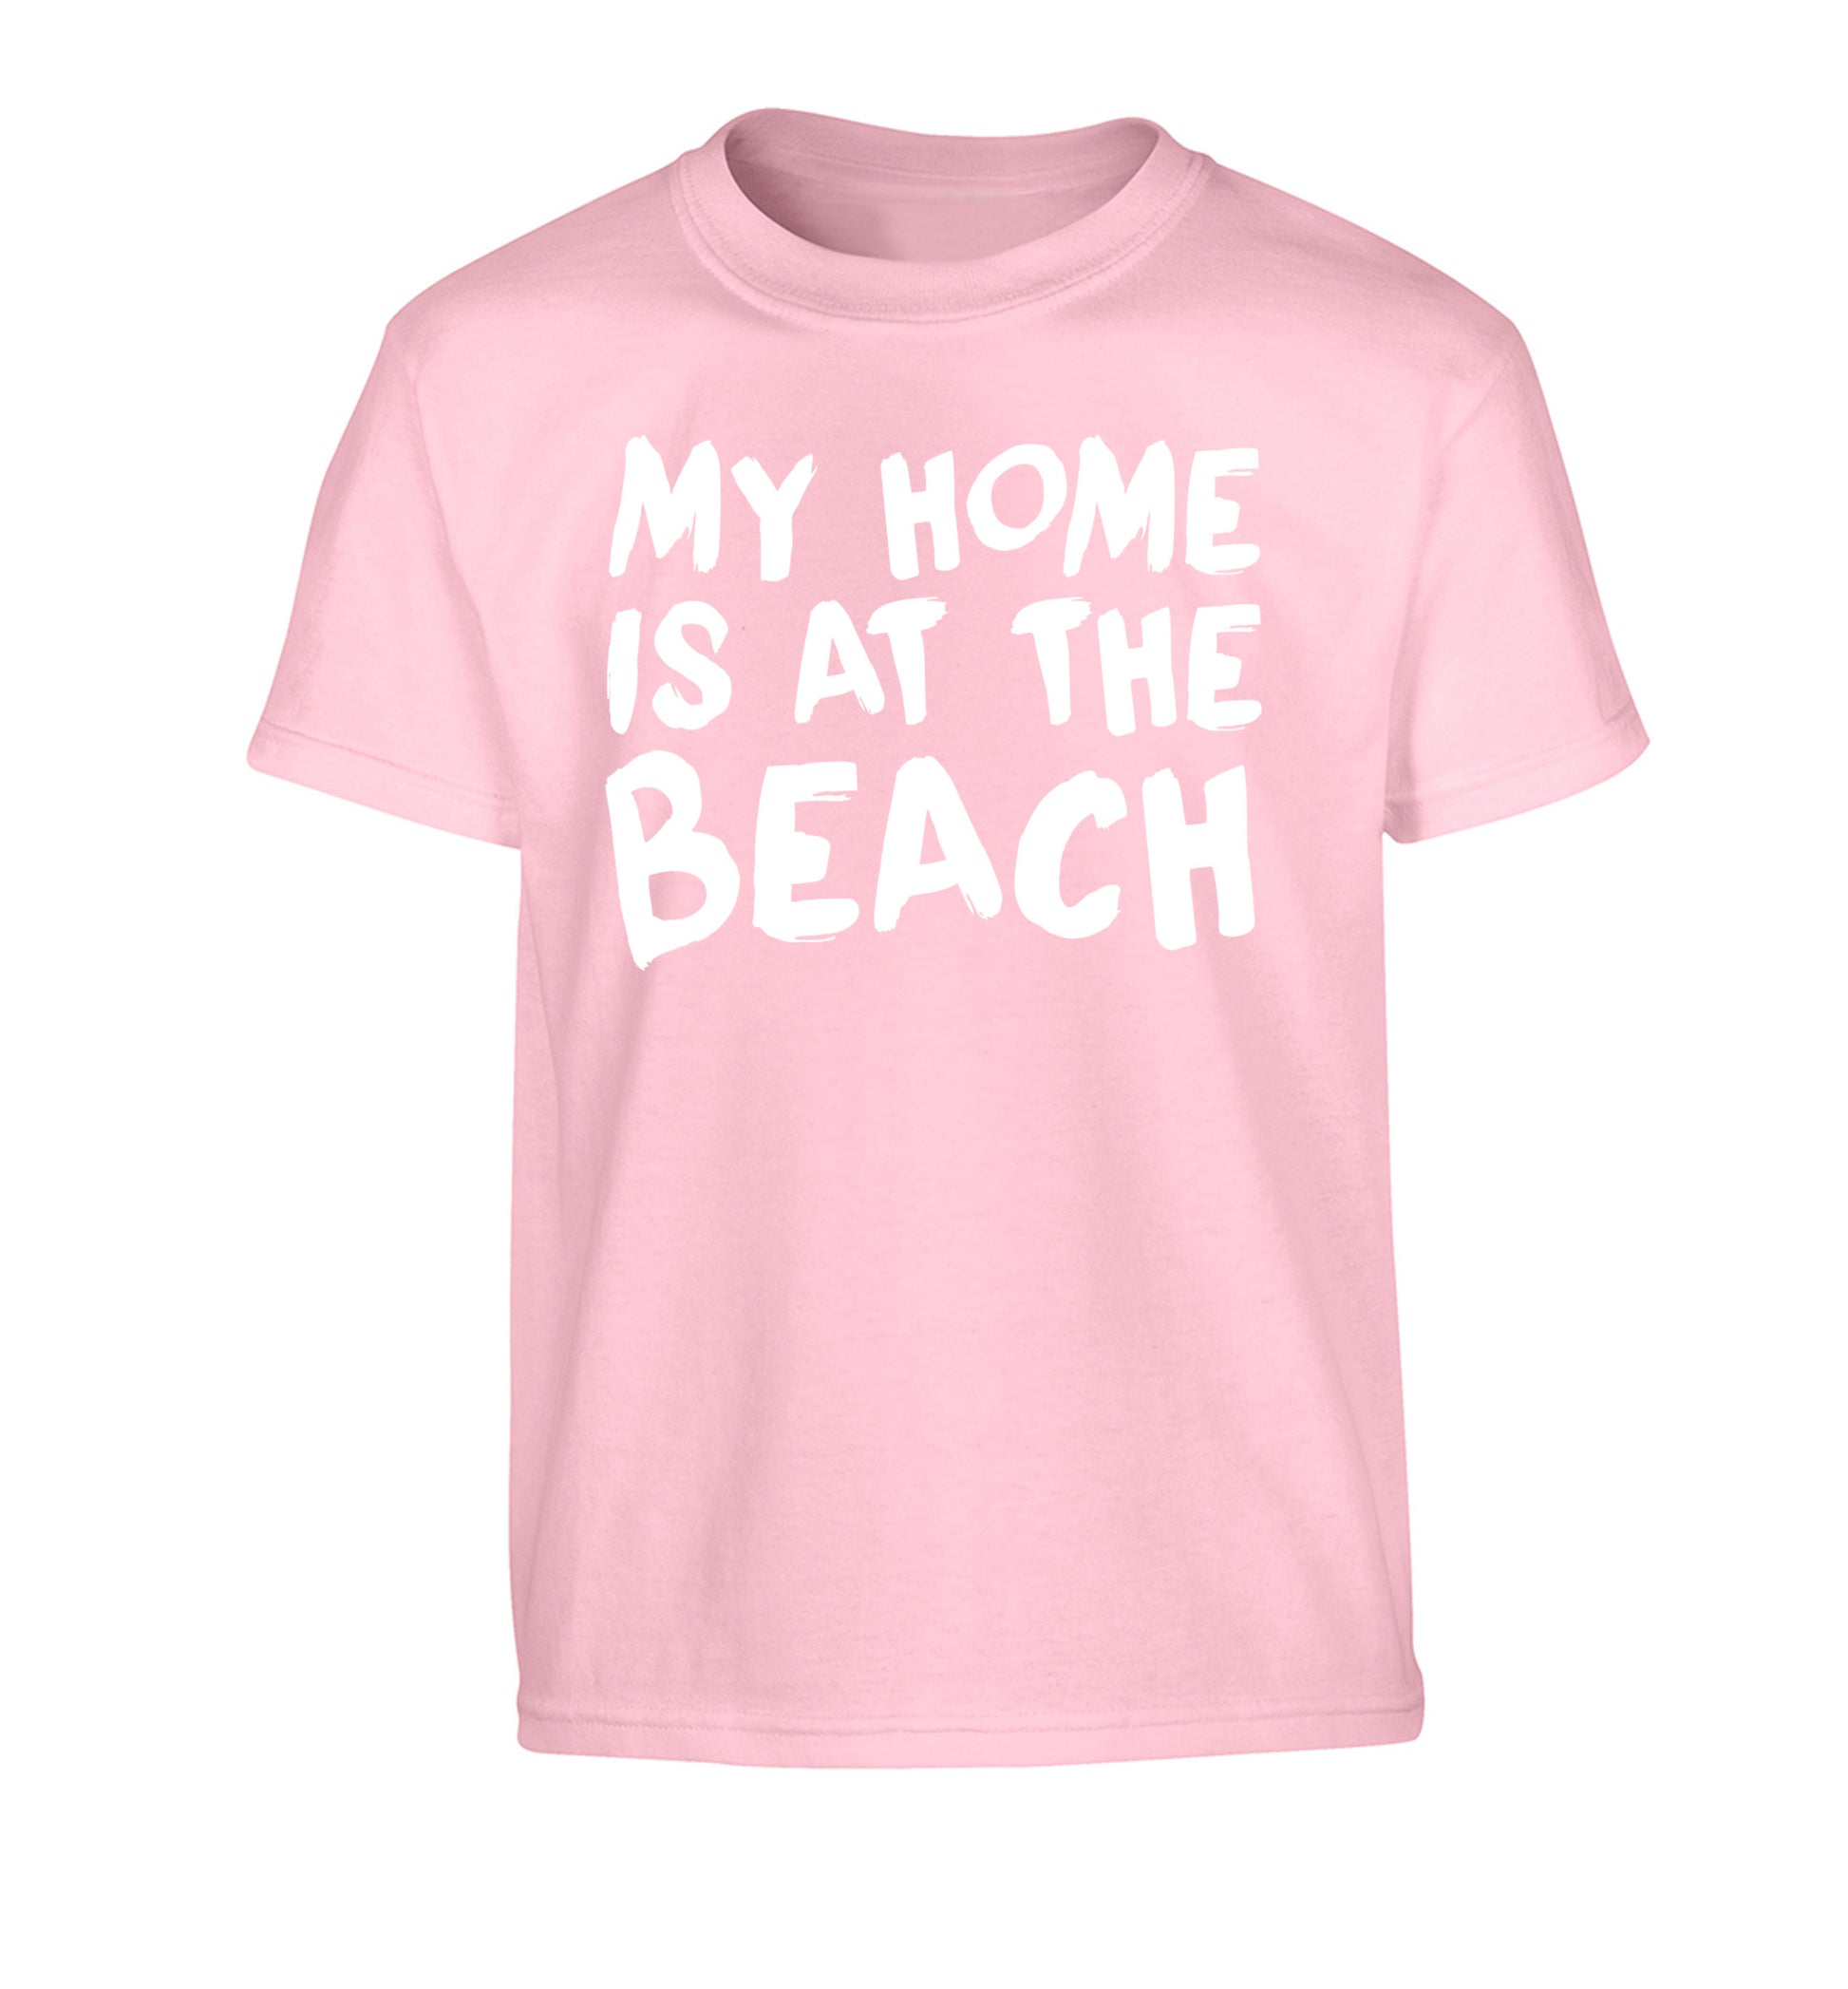 My home is at the beach Children's light pink Tshirt 12-14 Years